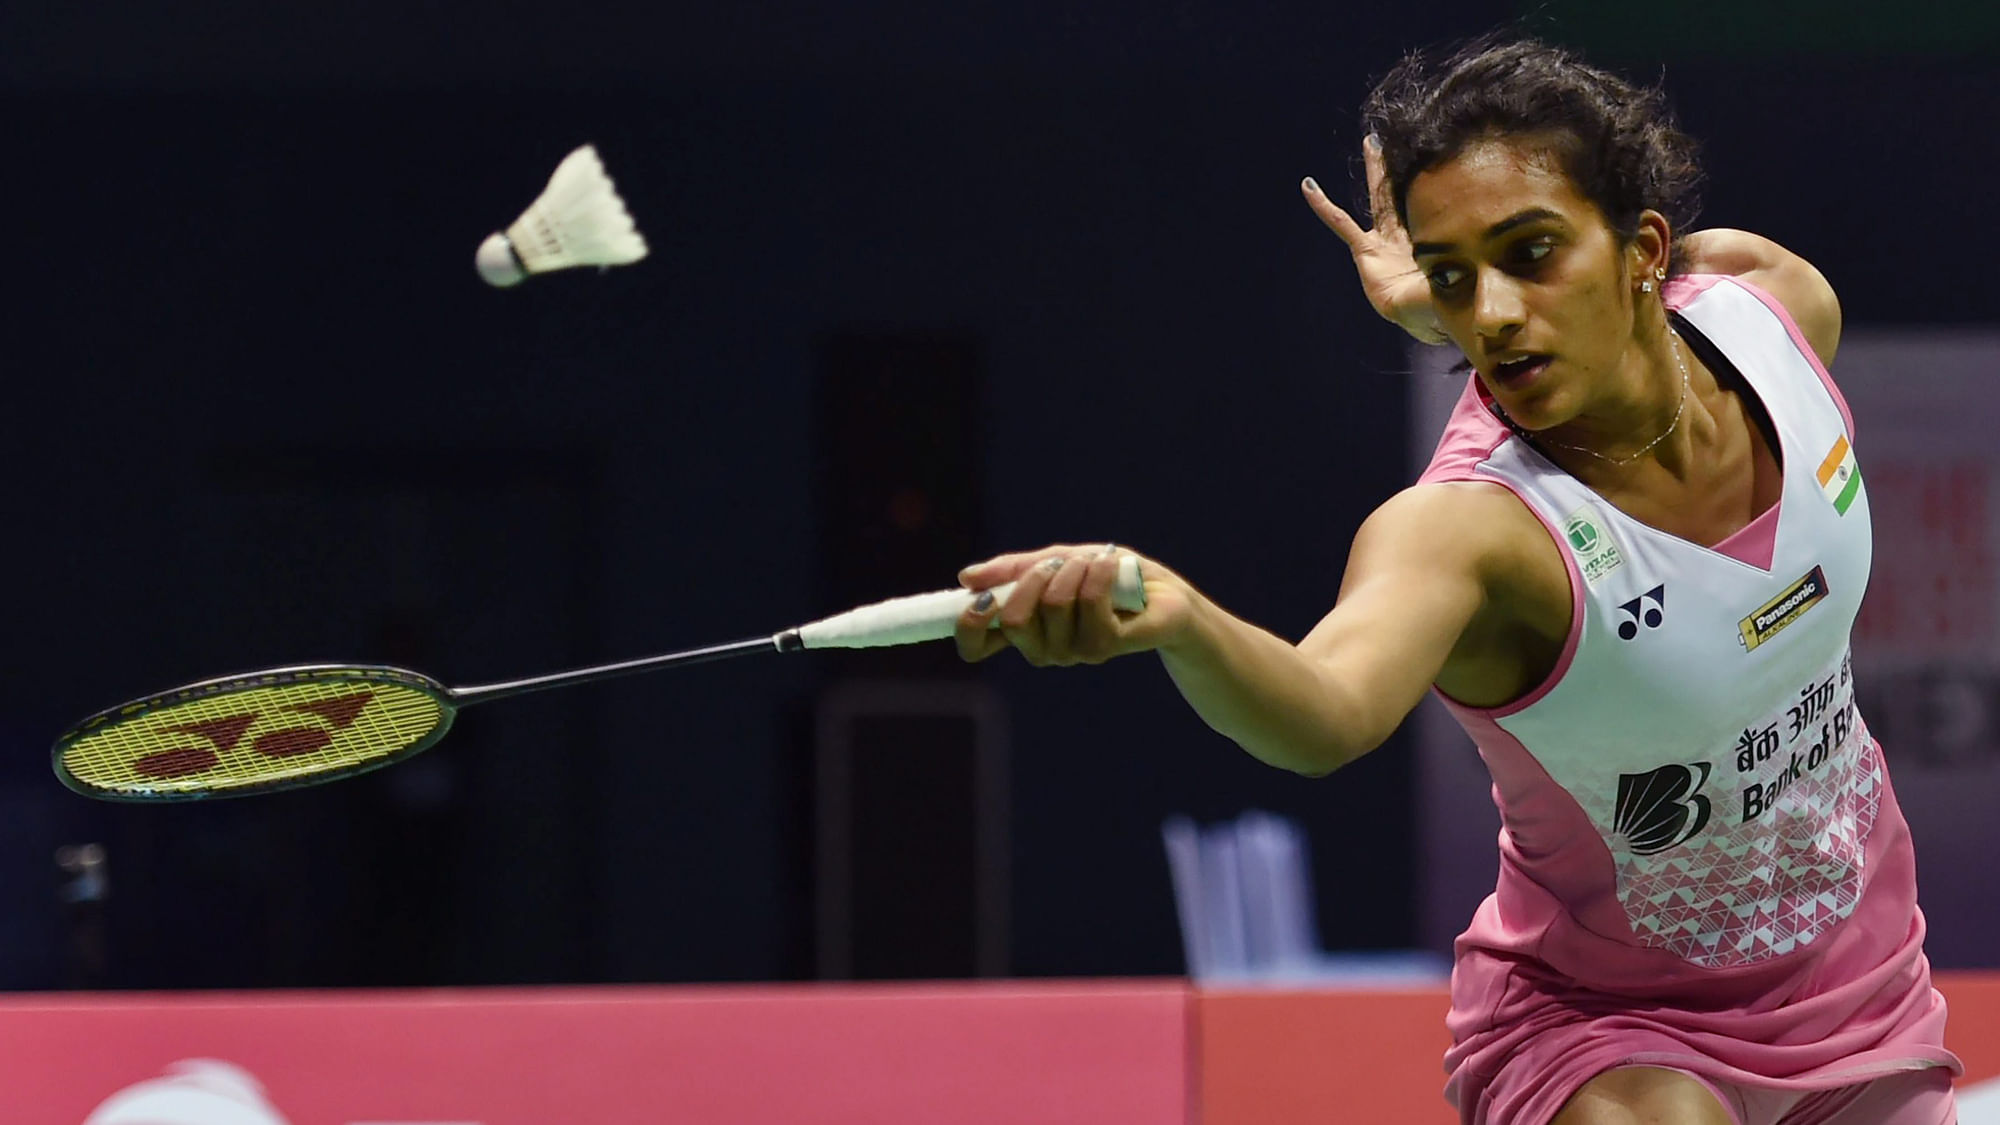 PV Sindhu lost in the women’s singles final of the $350,000 India Open BWF World Tour Super 500.